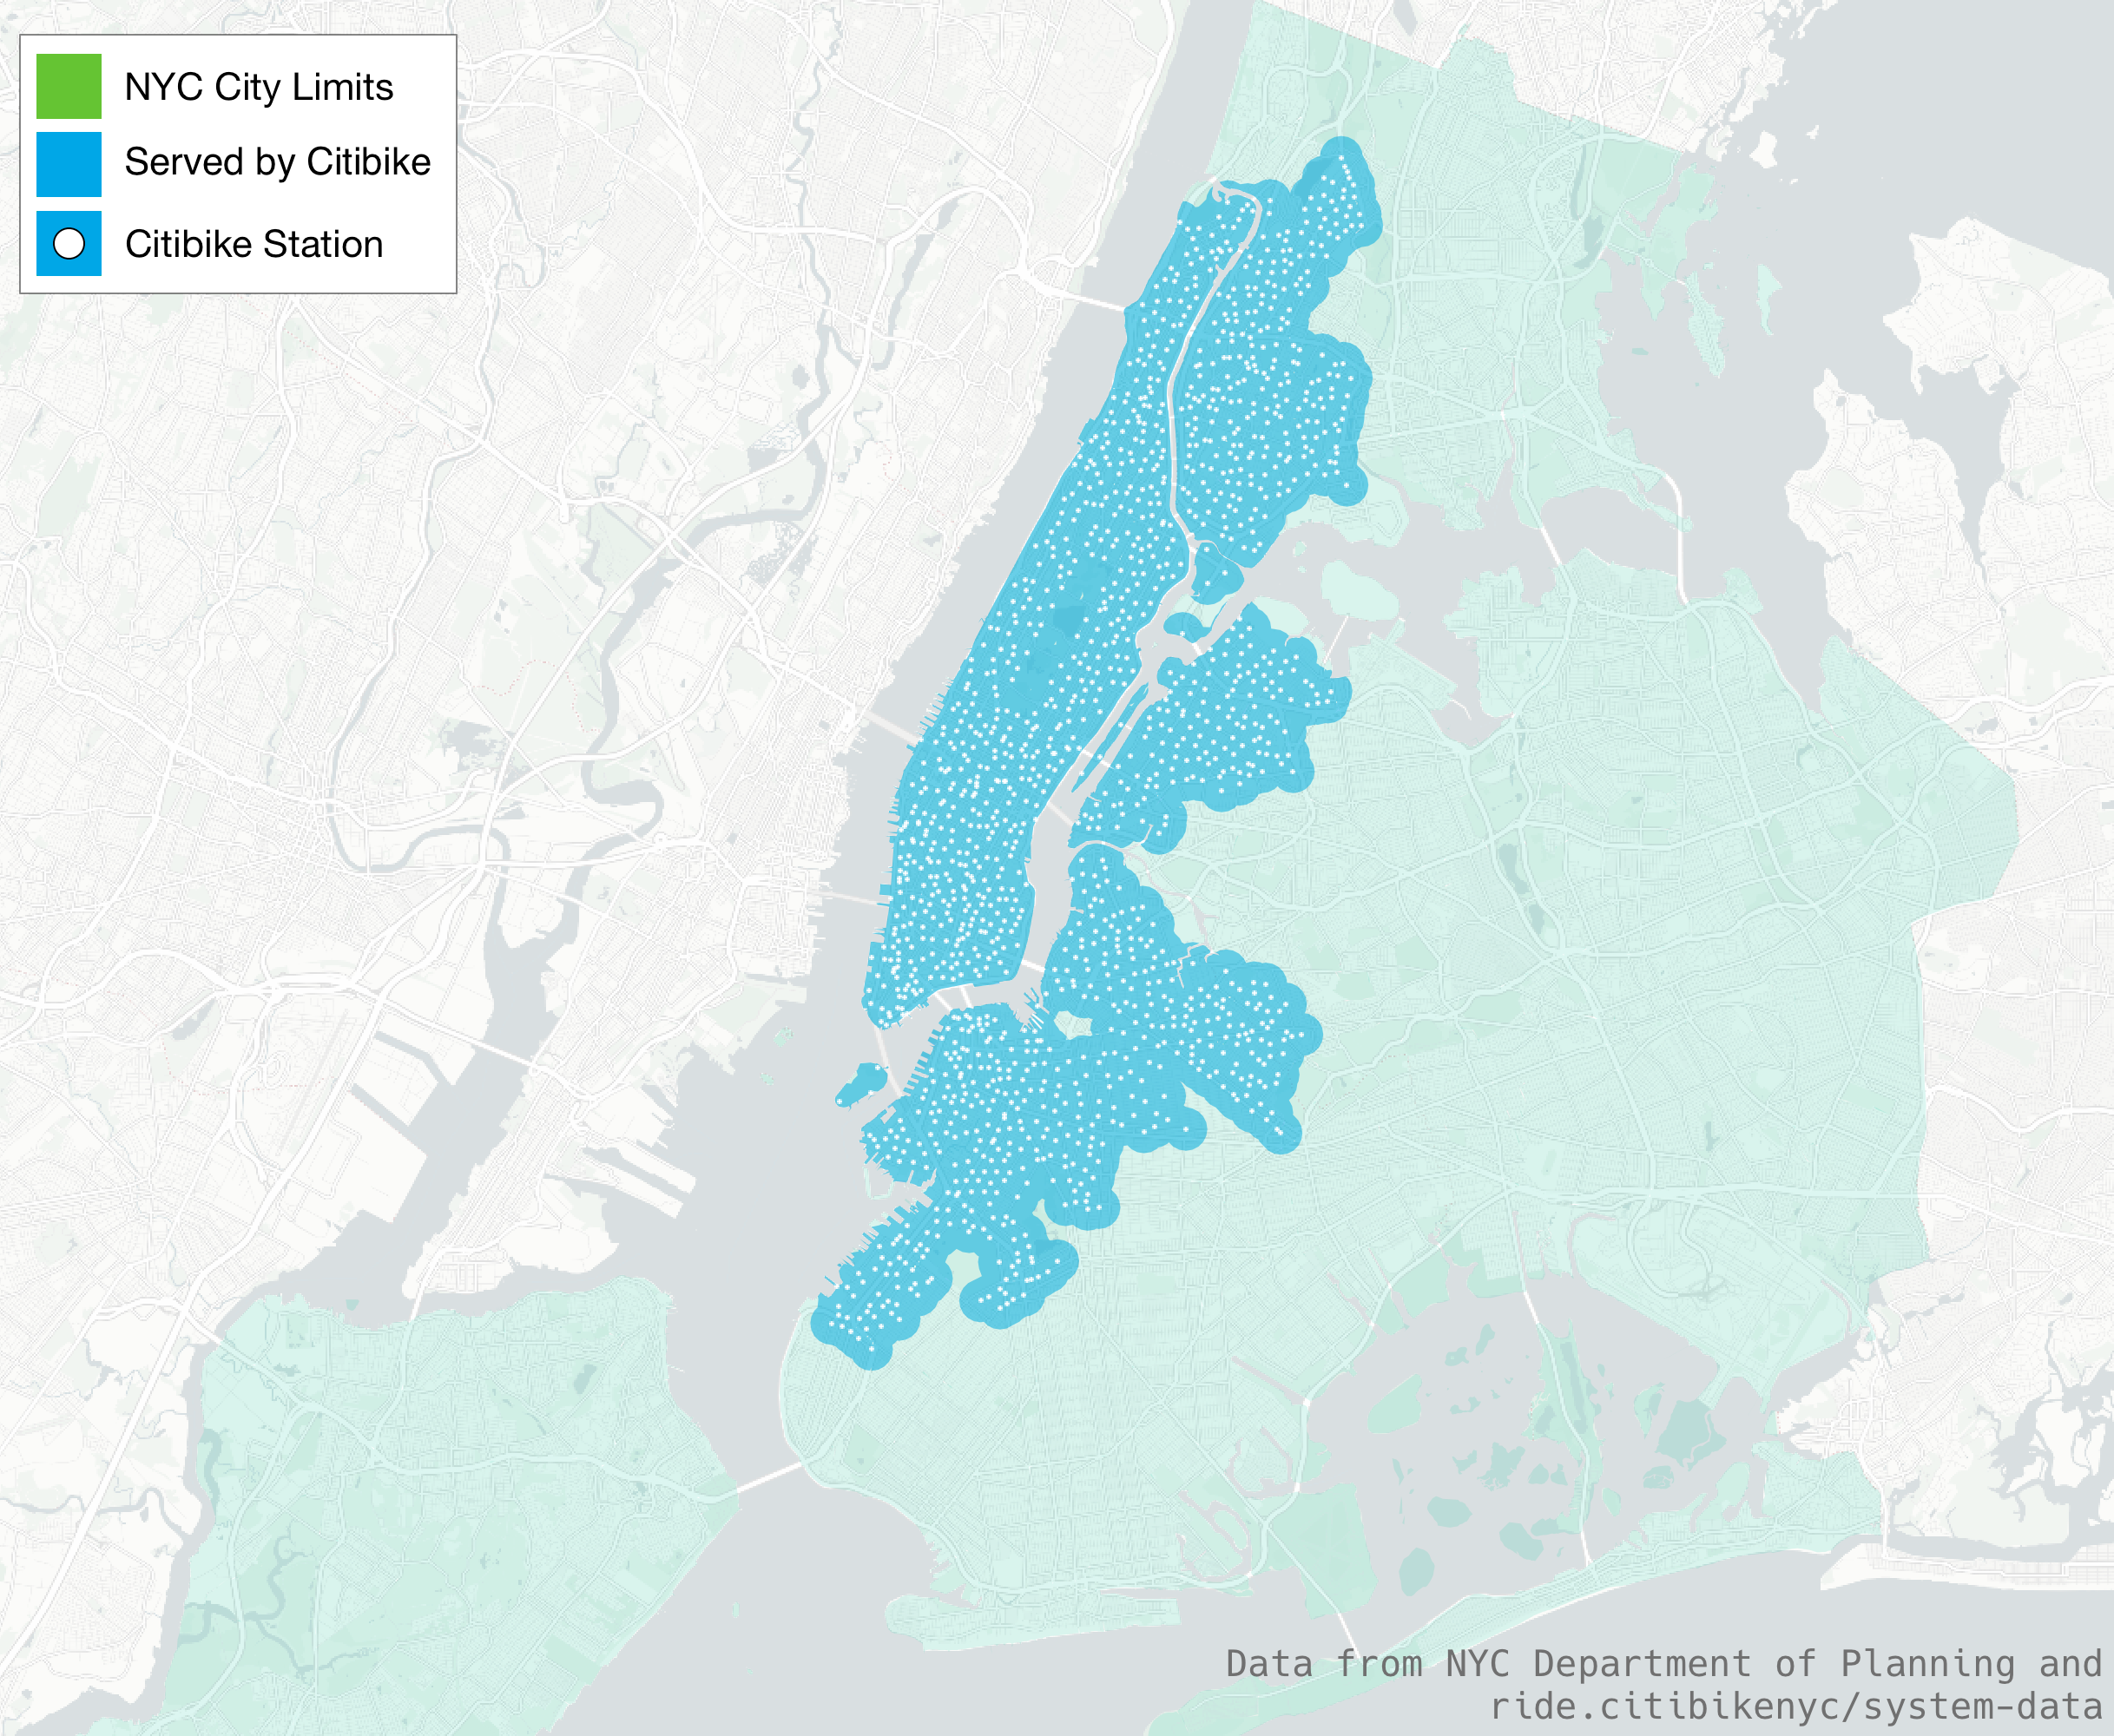 Areas served by Citibike